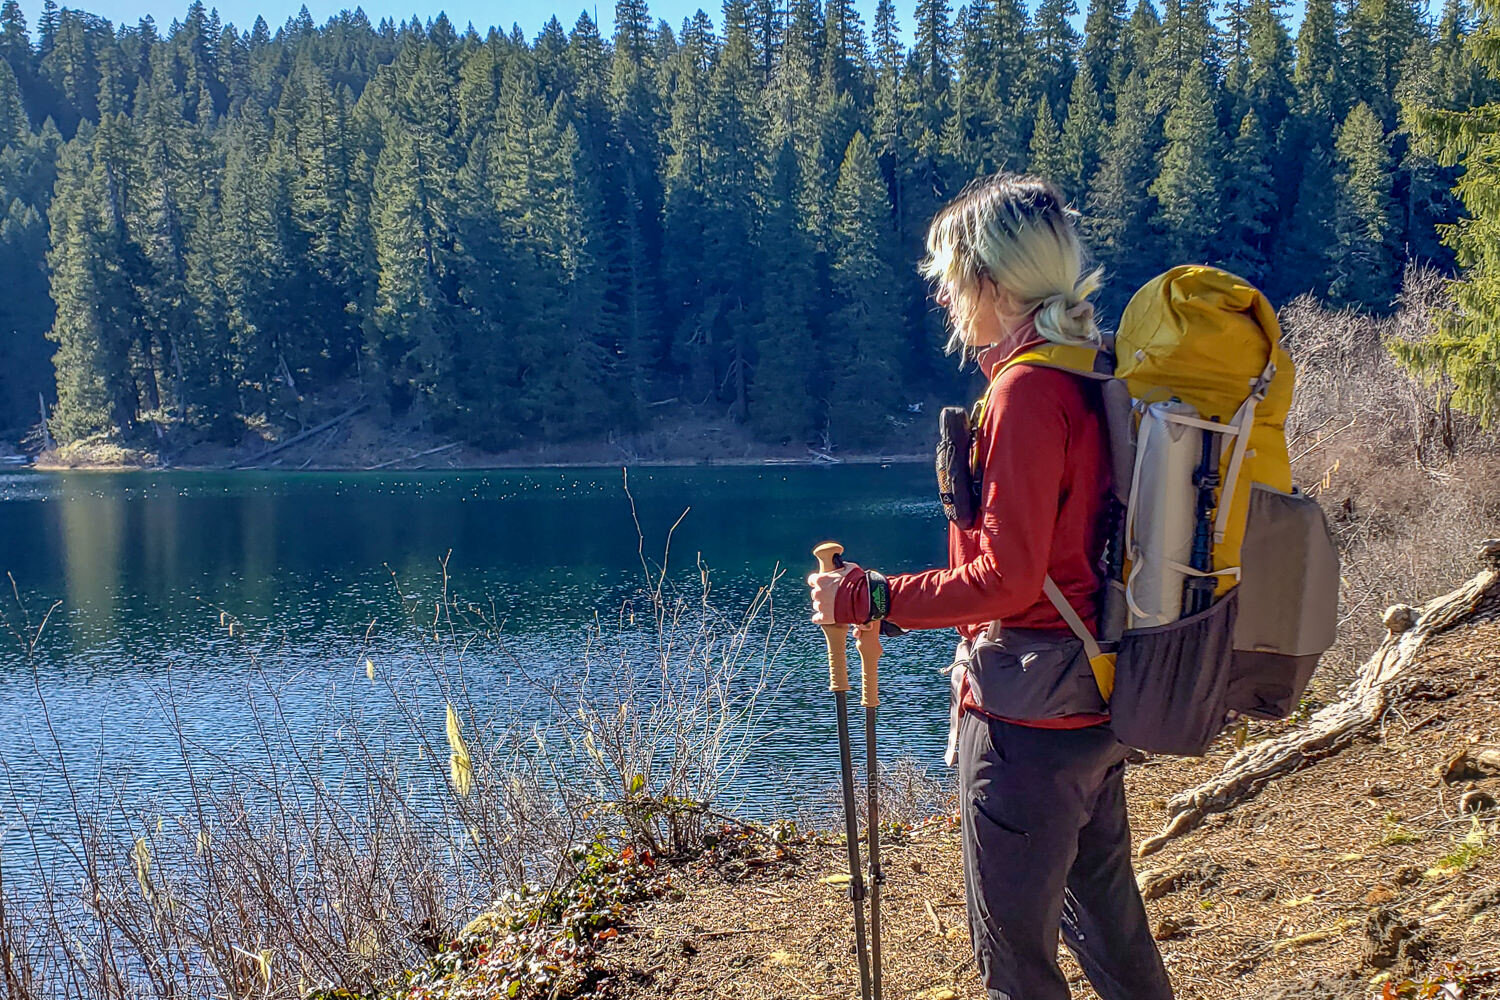 Backpacking with the ultralight and affordable Gossamer Gear Gorilla 50 in early spring.